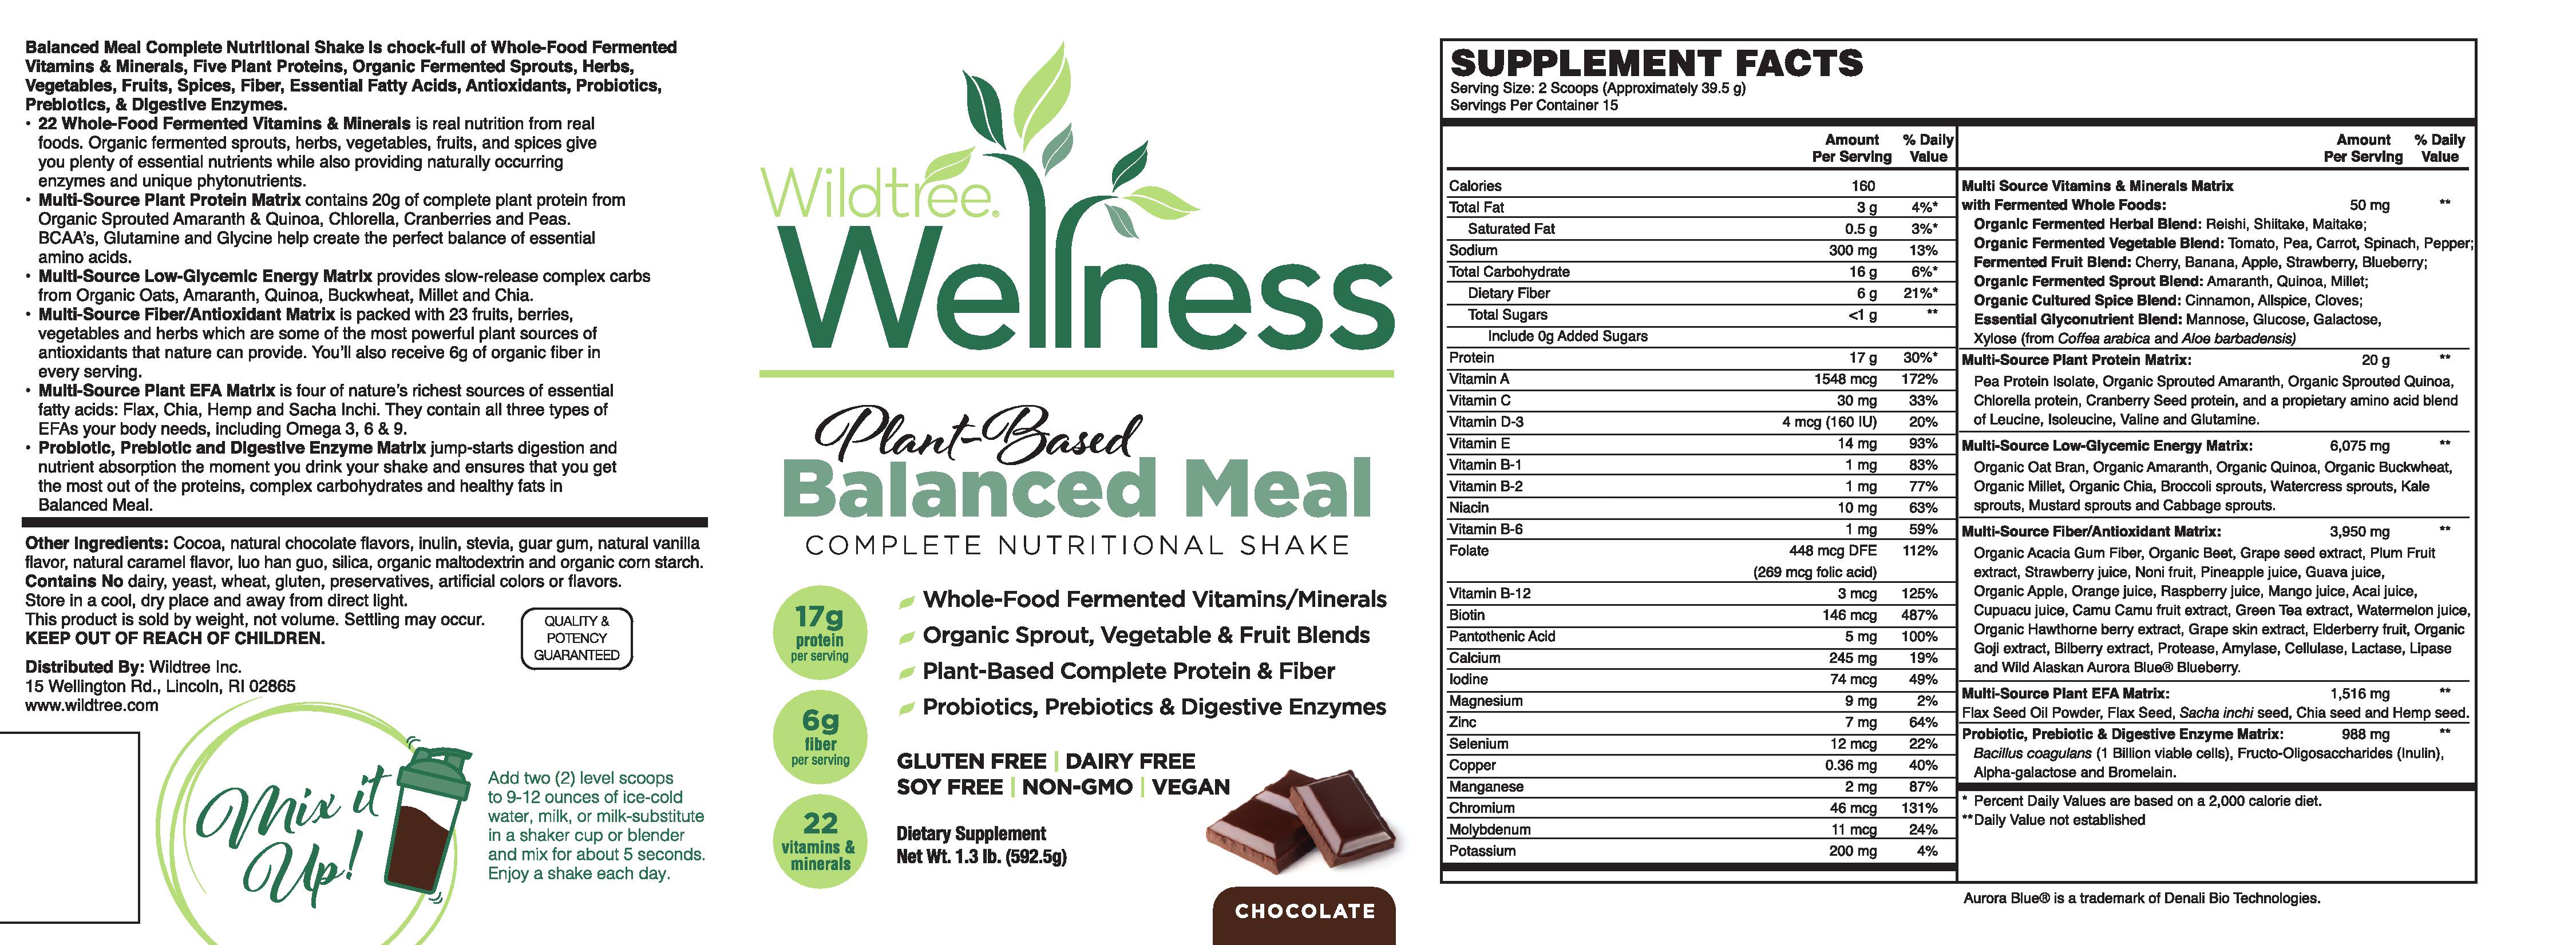 NEW Wildtree Wellness Shakes: Balanced Meals in 1 Minute! - Direct ...